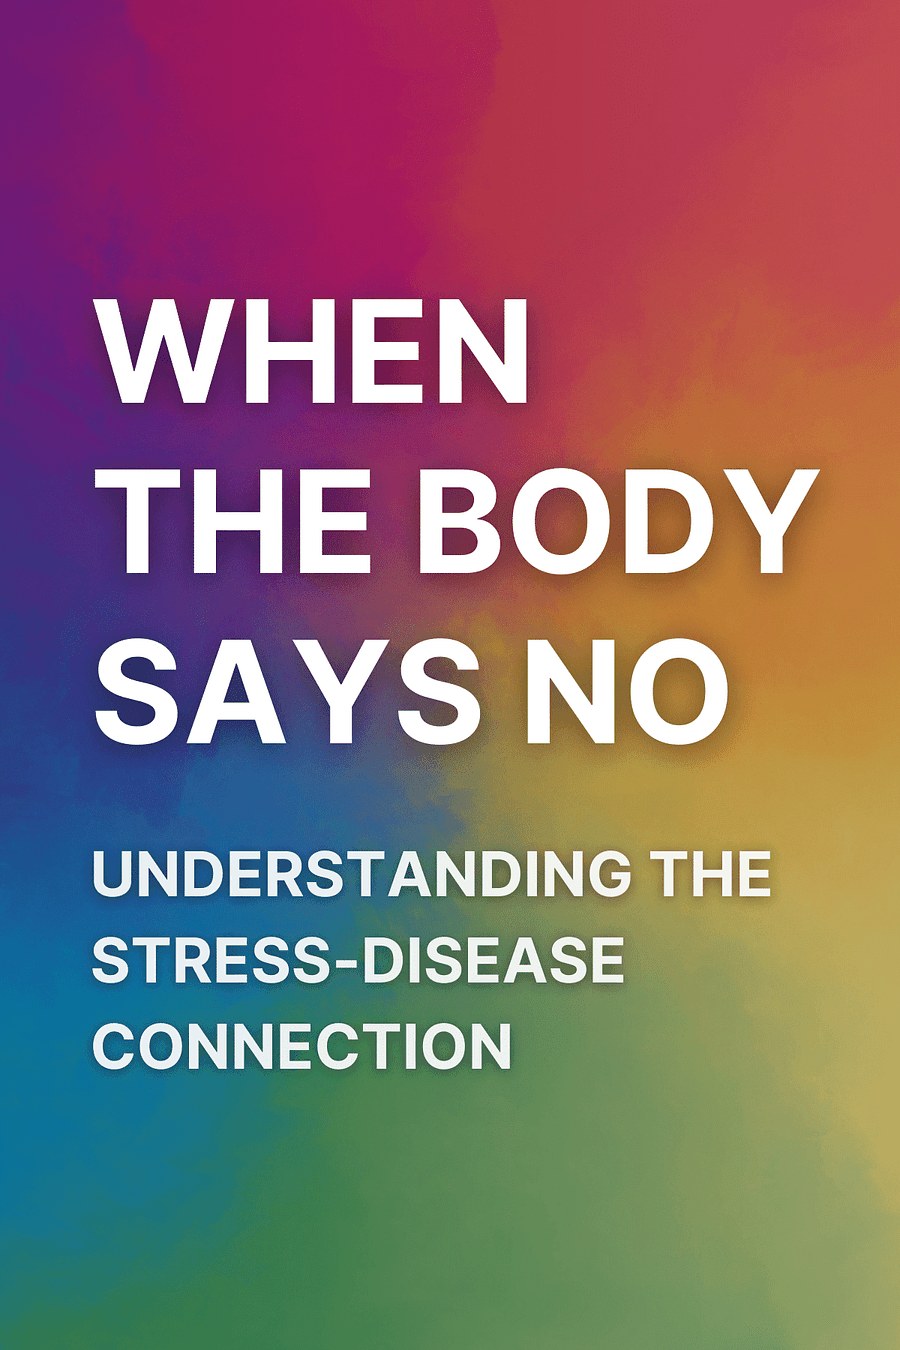 When the Body Says No by Dr. Gabor Maté MD - Book Summary